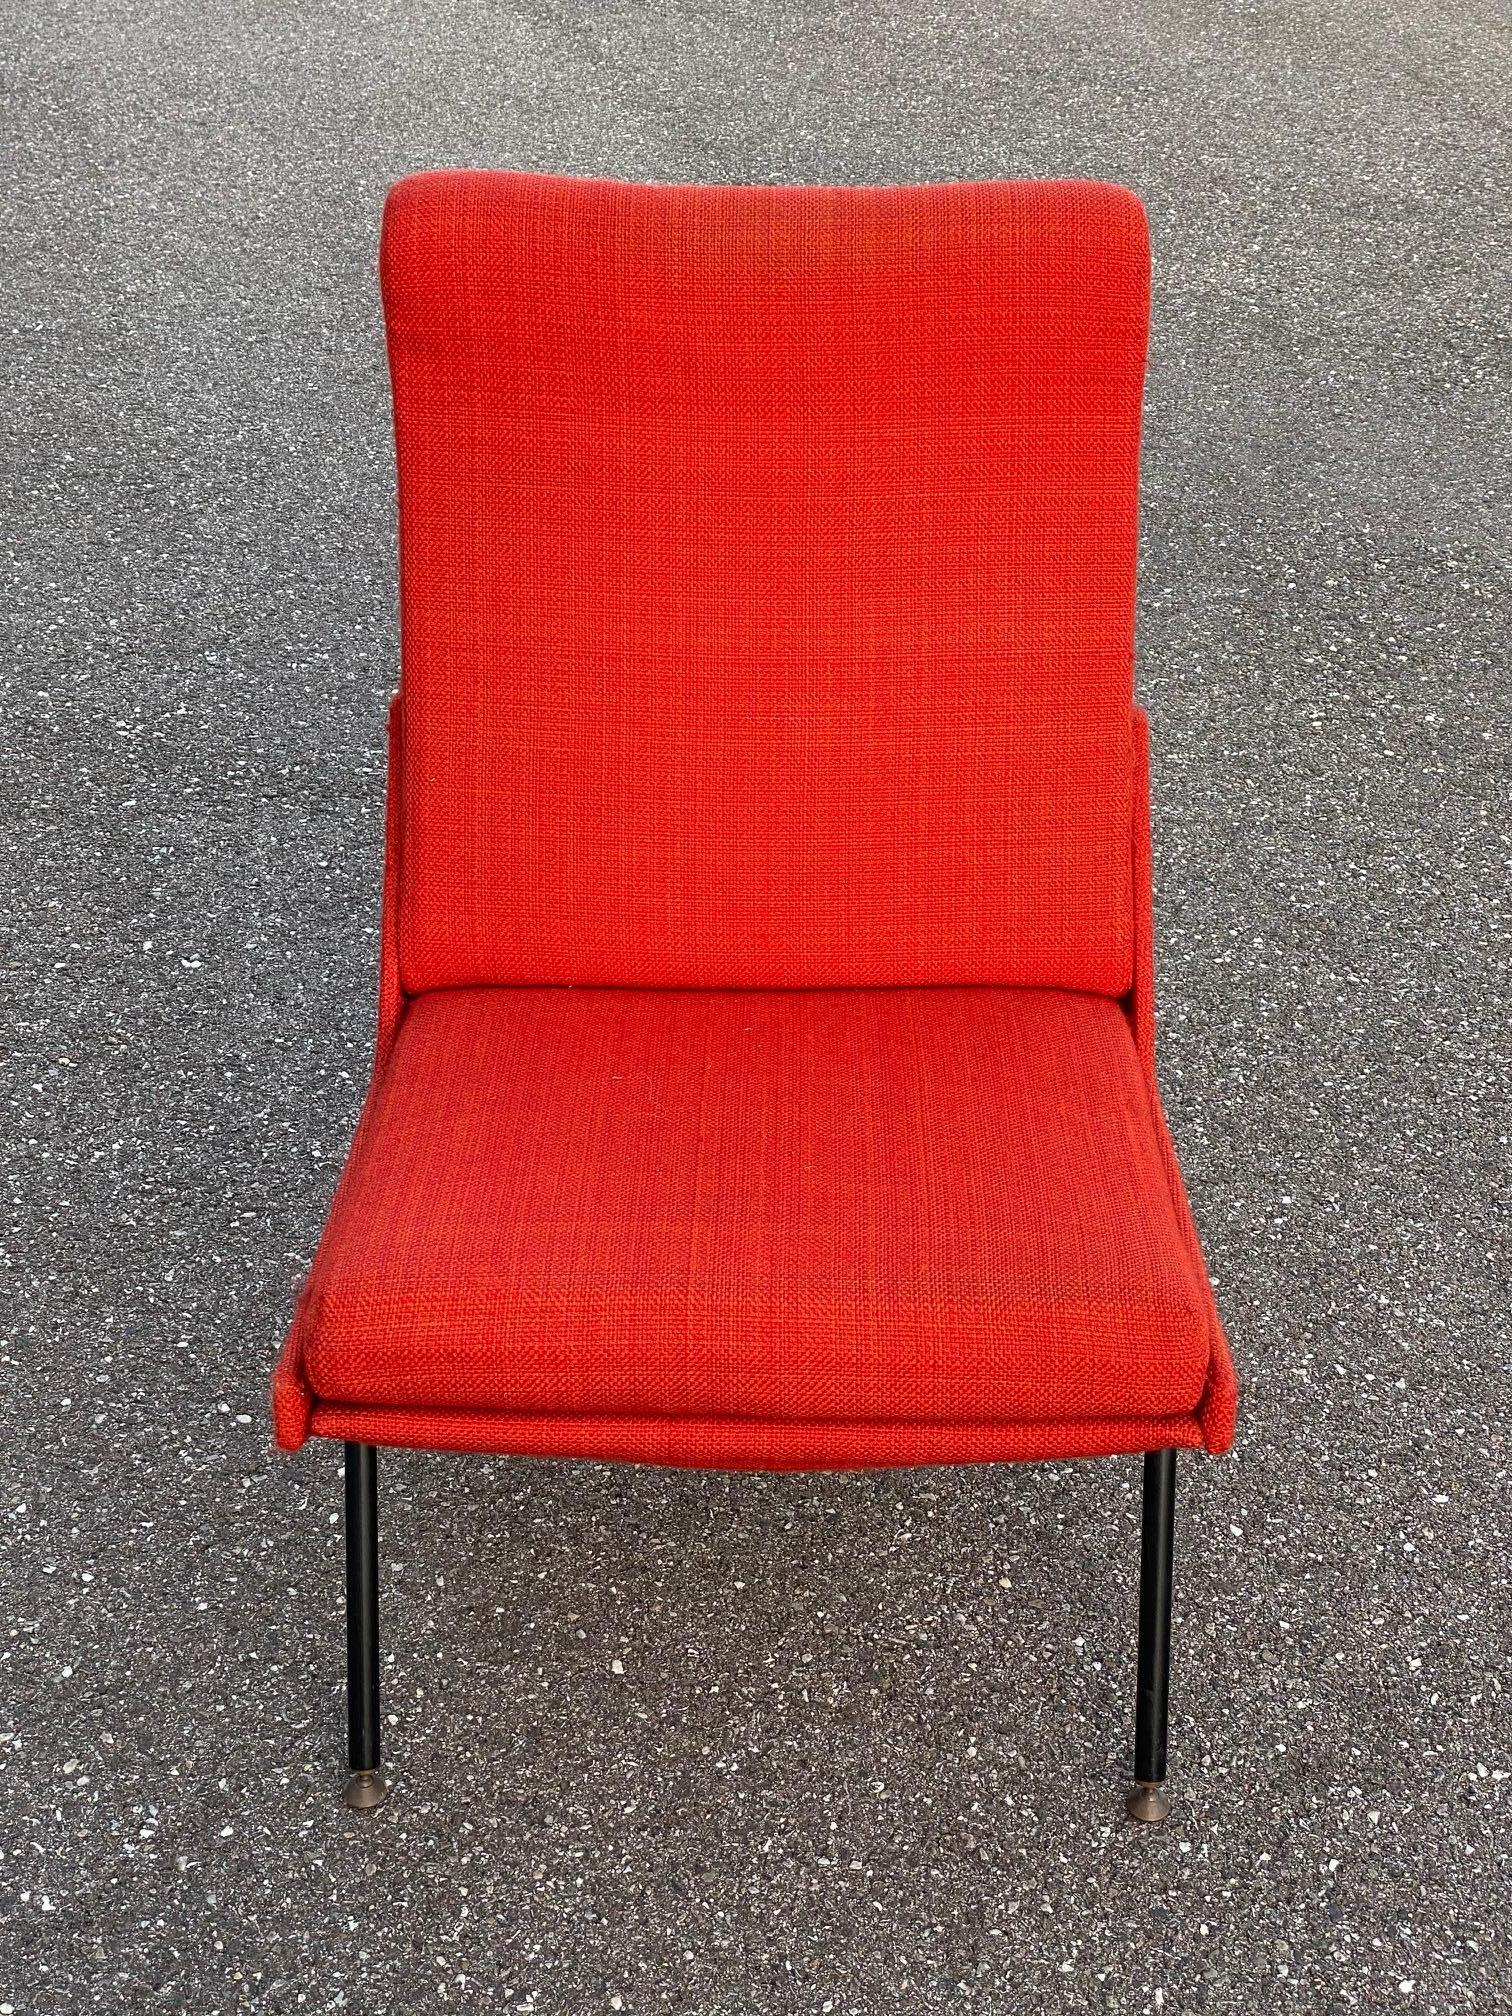 20th Century Troika Slipper Chair by Pierre Guariche For Sale